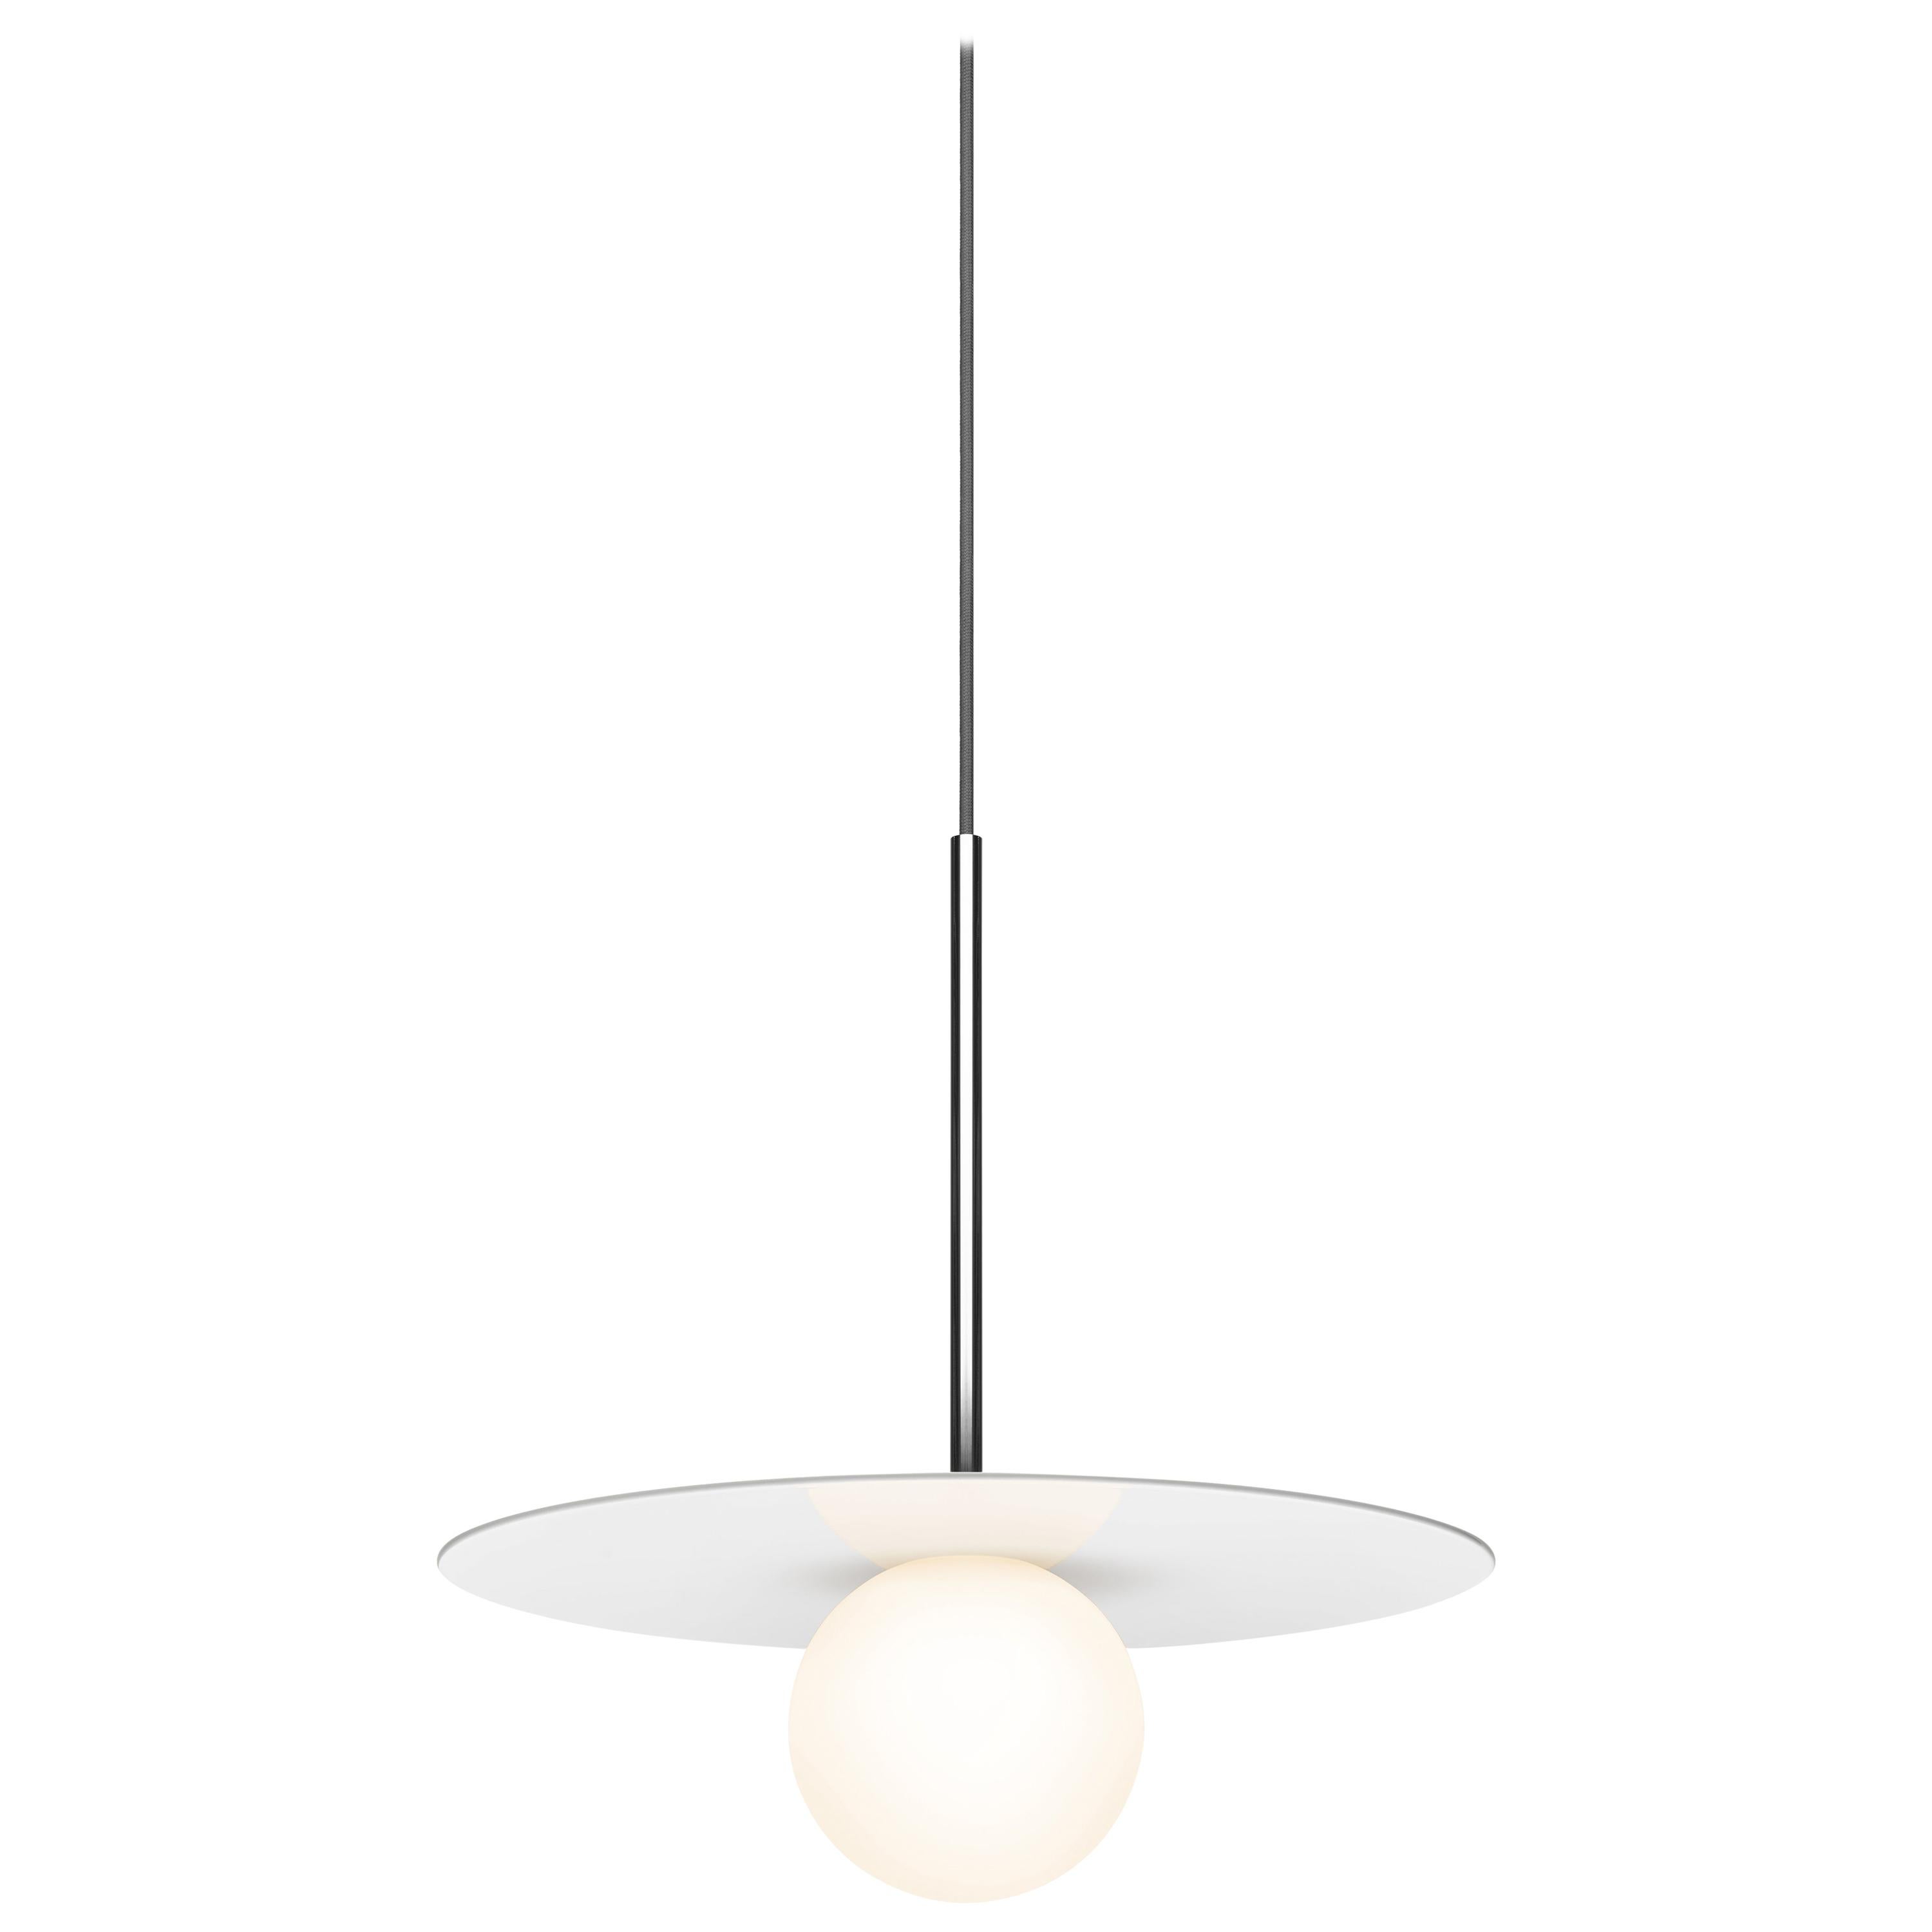 Bola Disc 12” Pendant Light in White by Pablo Designs